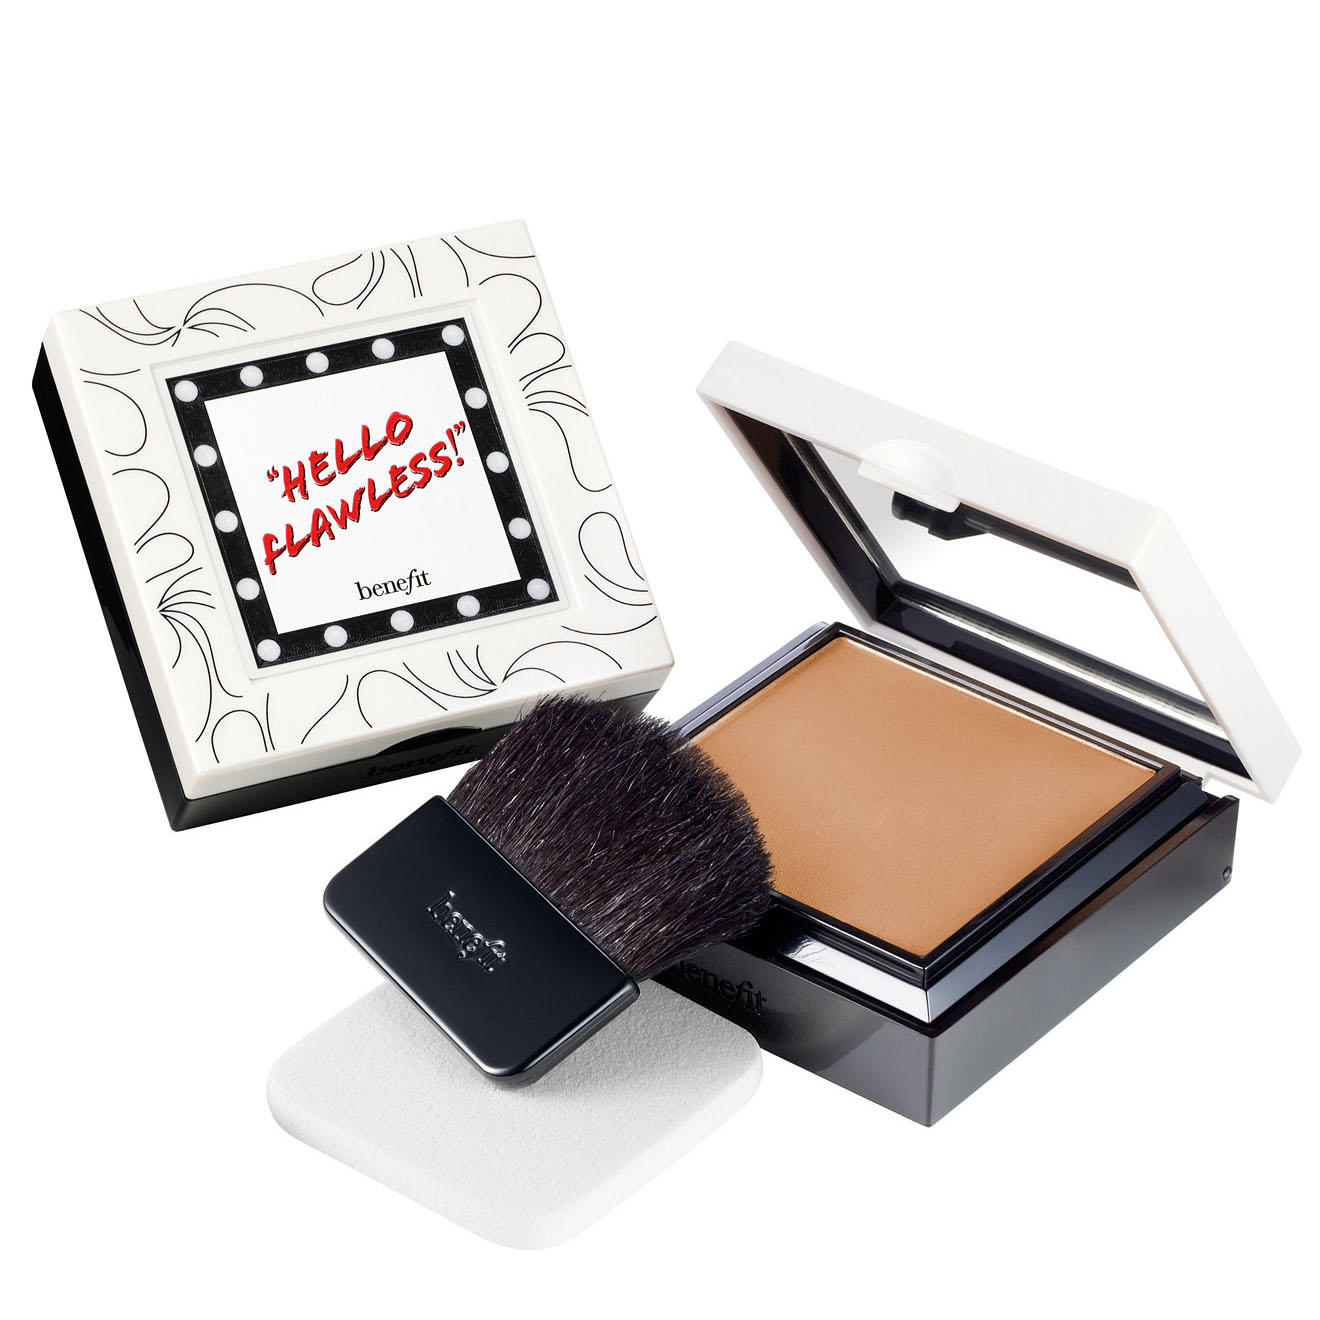 Benefit Cosmetics Hello Flawless! SPF 15 What I Crave Toasted Beige